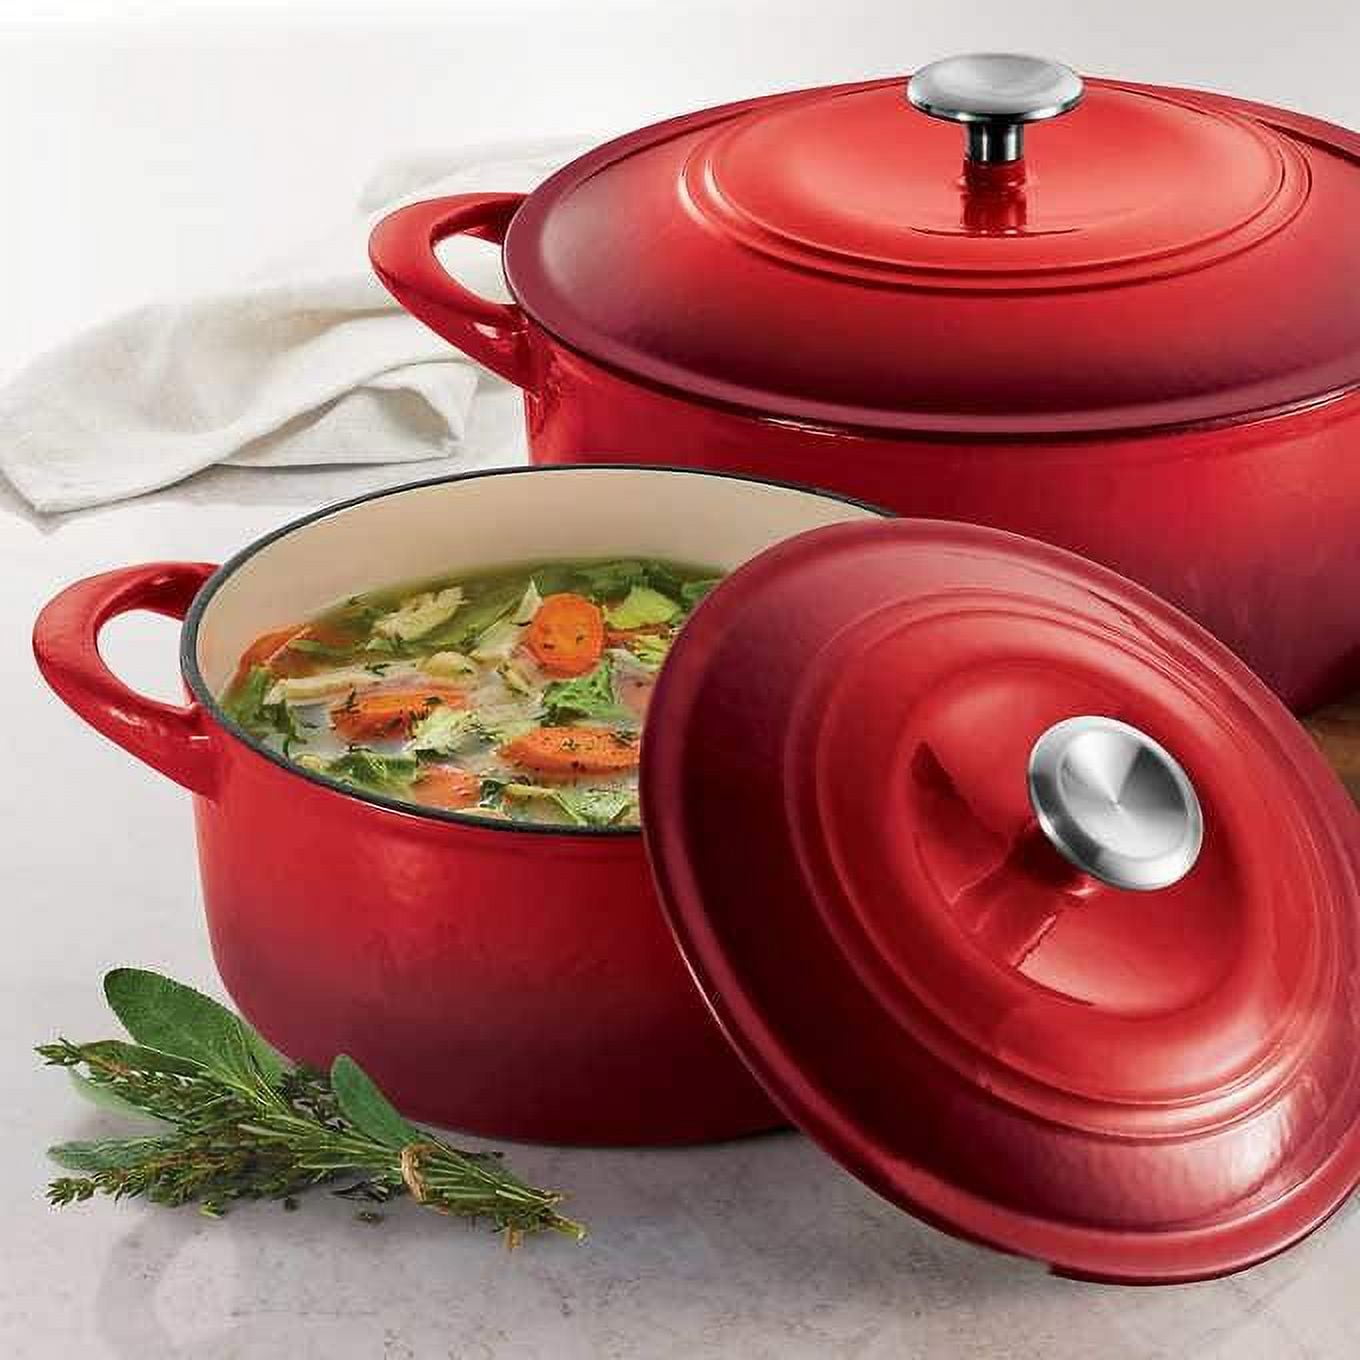  2 in 1 Enameled Cast Iron Dutch Oven, 5.5QT Enamel Dutch Oven  with Skillet Lid, Gas, Induction Compatible, Red: Home & Kitchen